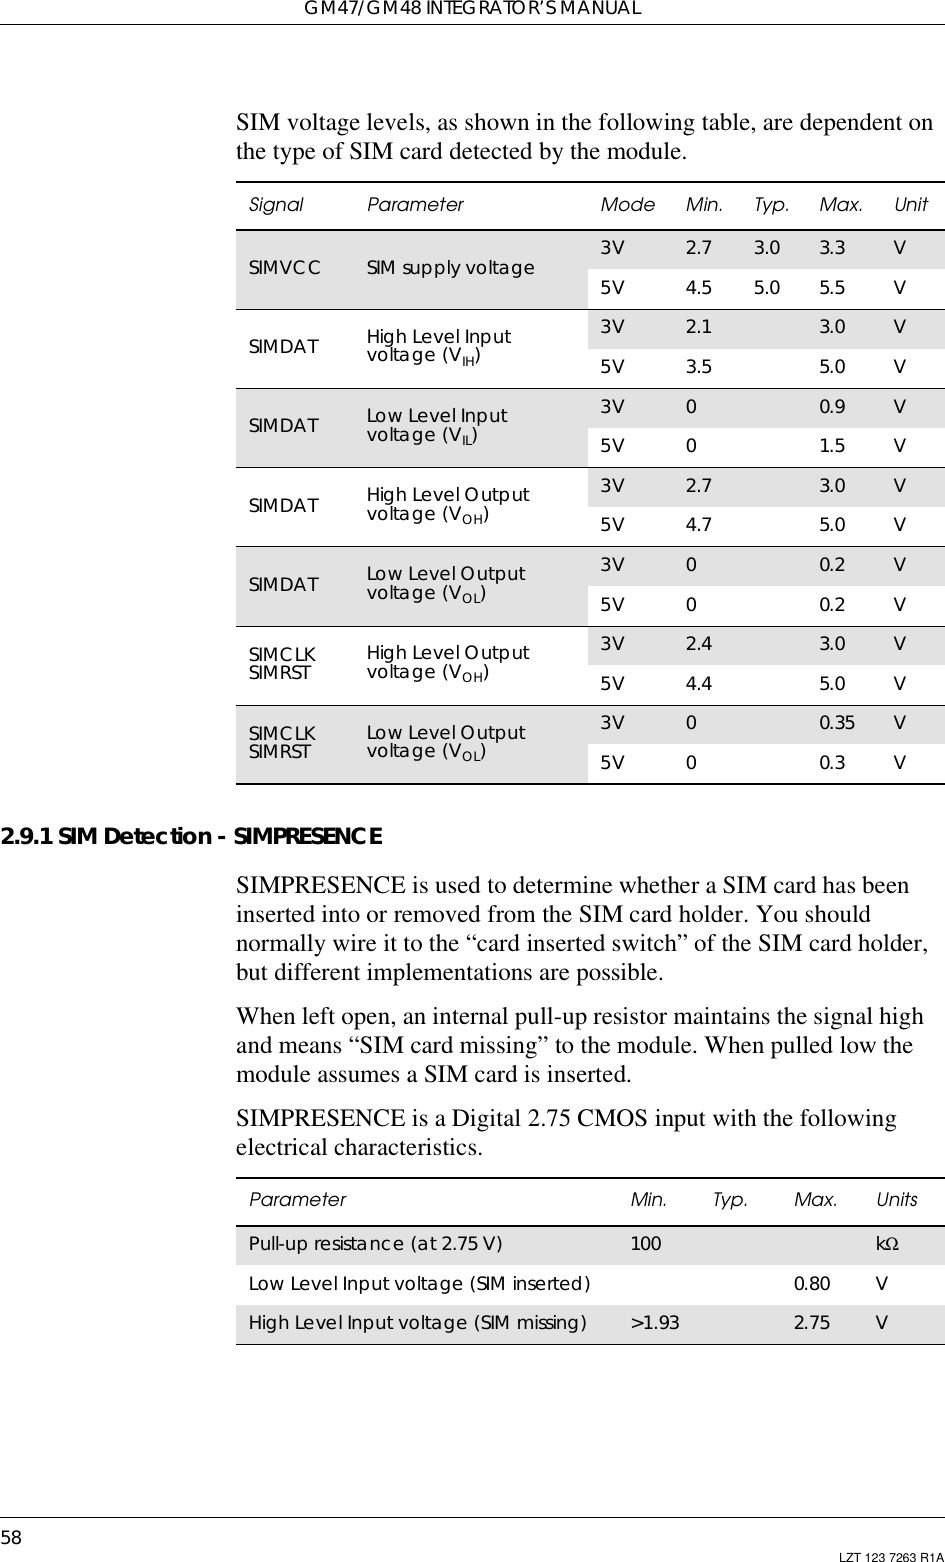 GM47/GM48 INTEGRATOR’S MANUAL58 LZT 123 7263 R1ASIM voltage levels, as shown in the following table, are dependent onthe type of SIM card detected by the module.2.9.1 SIM Detection - SIMPRESENCESIMPRESENCE is used to determine whether a SIM card has beeninserted into or removed from the SIM card holder. You shouldnormally wire it to the “card inserted switch” of the SIM card holder,but different implementations are possible.When left open, an internal pull-up resistor maintains the signal highand means “SIM card missing” to the module. When pulled low themodule assumes a SIM card is inserted.SIMPRESENCE is a Digital 2.75 CMOS input with the followingelectrical characteristics.Signal Parameter Mode Min. Typ. Max. UnitSIMVCC SIM supply voltage 3V 2.7 3.0 3.3 V5V 4.5 5.0 5.5 VSIMDAT High Level Inputvoltage (VIH)3V 2.1 3.0 V5V 3.5 5.0 VSIMDAT Low Level Inputvoltage (VIL)3V 00.9 V5V 01.5 VSIMDAT High Level Outputvoltage (VOH)3V 2.7 3.0 V5V 4.7 5.0 VSIMDAT Low Level Outputvoltage (VOL)3V 00.2 V5V 00.2 VSIMCLKSIMRST High Level Outputvoltage (VOH)3V 2.4 3.0 V5V 4.4 5.0 VSIMCLKSIMRST Low Level Outputvoltage (VOL)3V 00.35 V5V 00.3 VParameter Min. Typ. Max. UnitsPull-up resistance (at 2.75 V) 100 kΩLow Level Input voltage (SIM inserted) 0.80 VHigh Level Input voltage (SIM missing) &gt;1.93 2.75 V